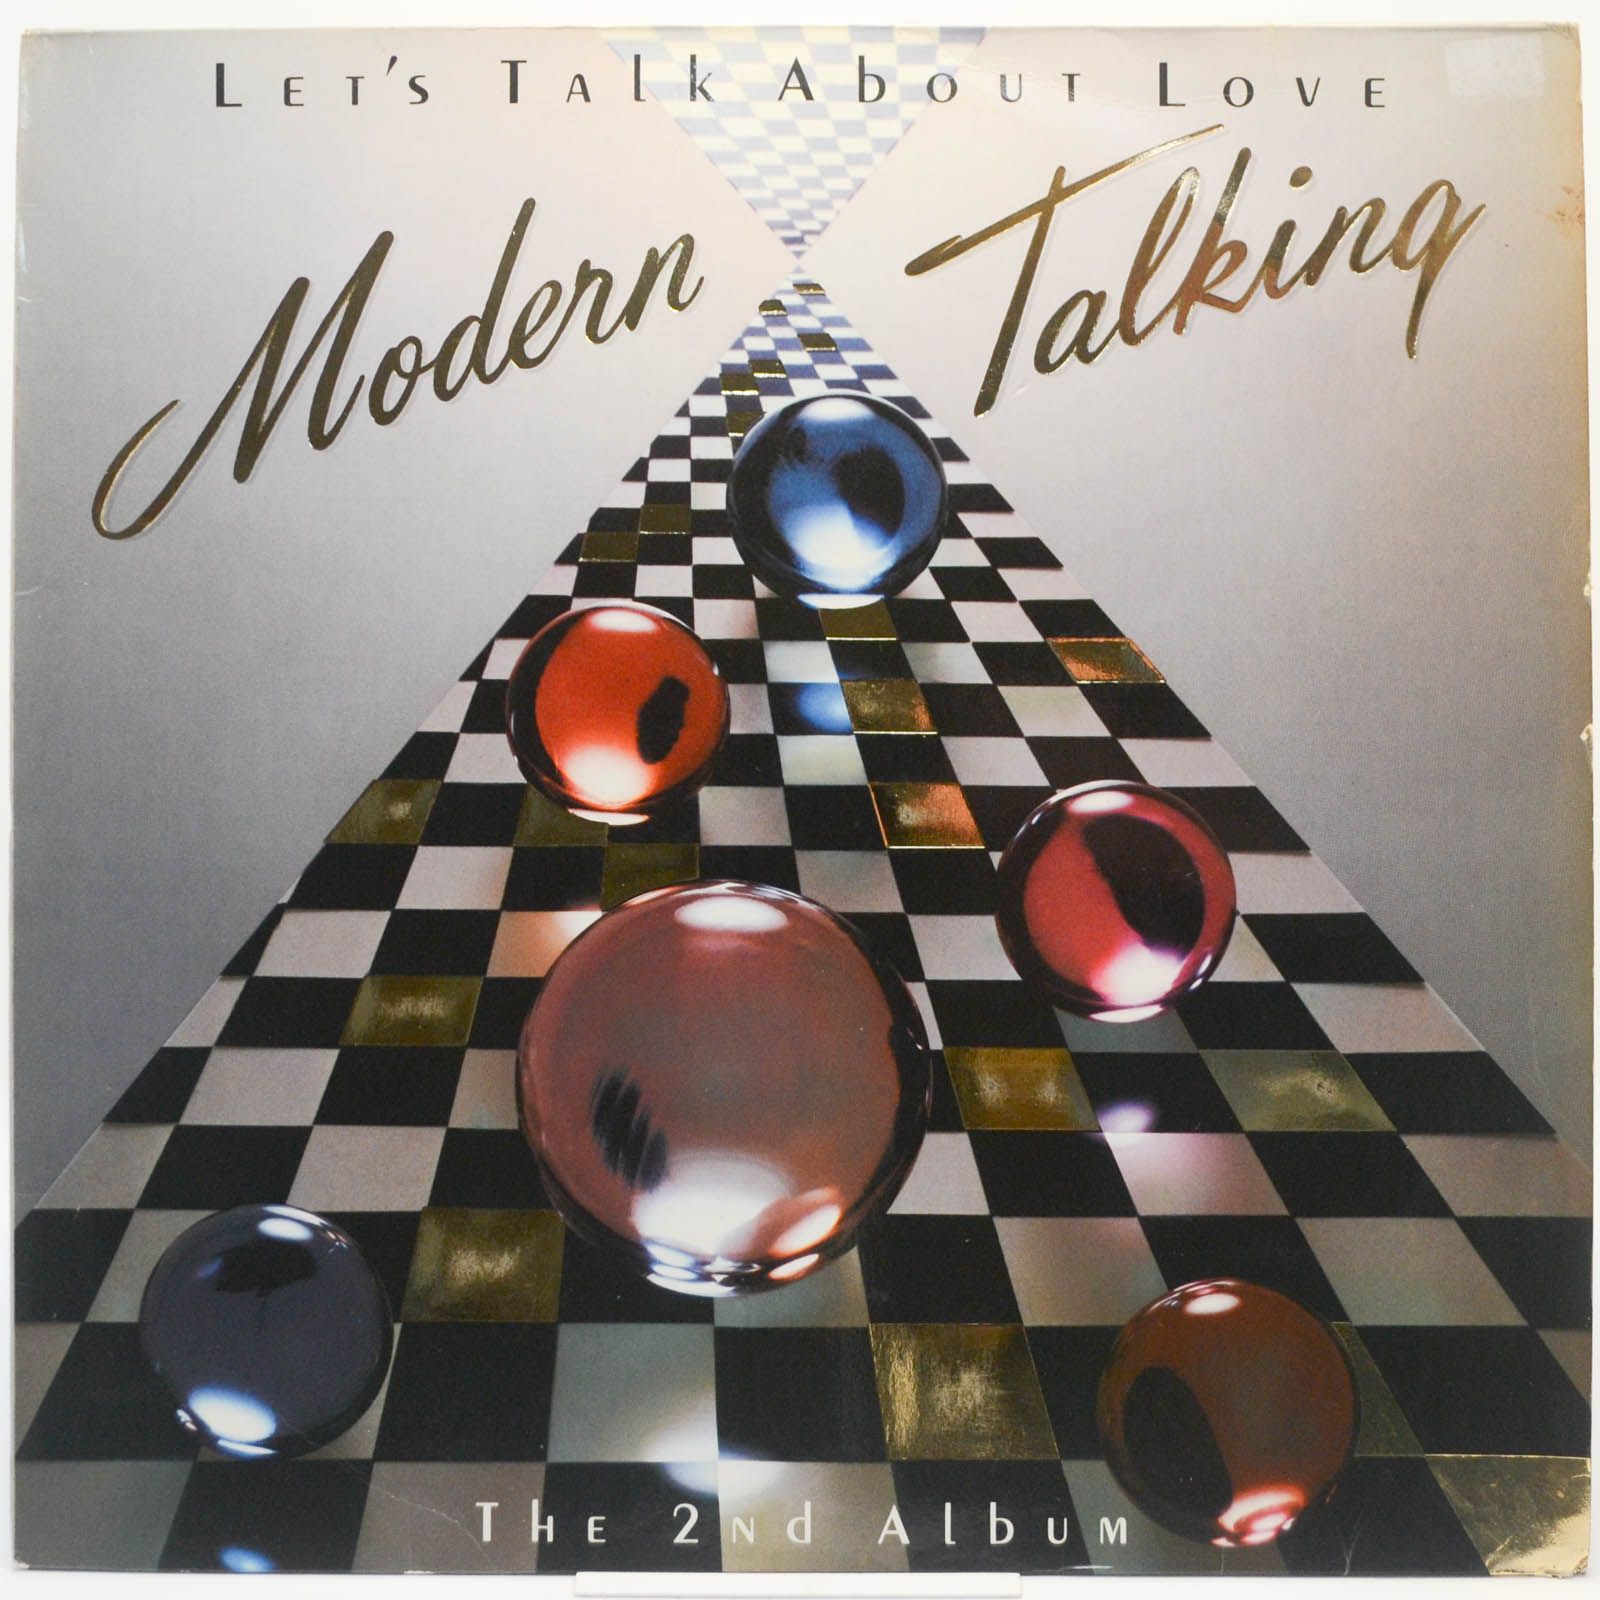 Modern Talking — Let's Talk About Love (The 2nd Album), 1985